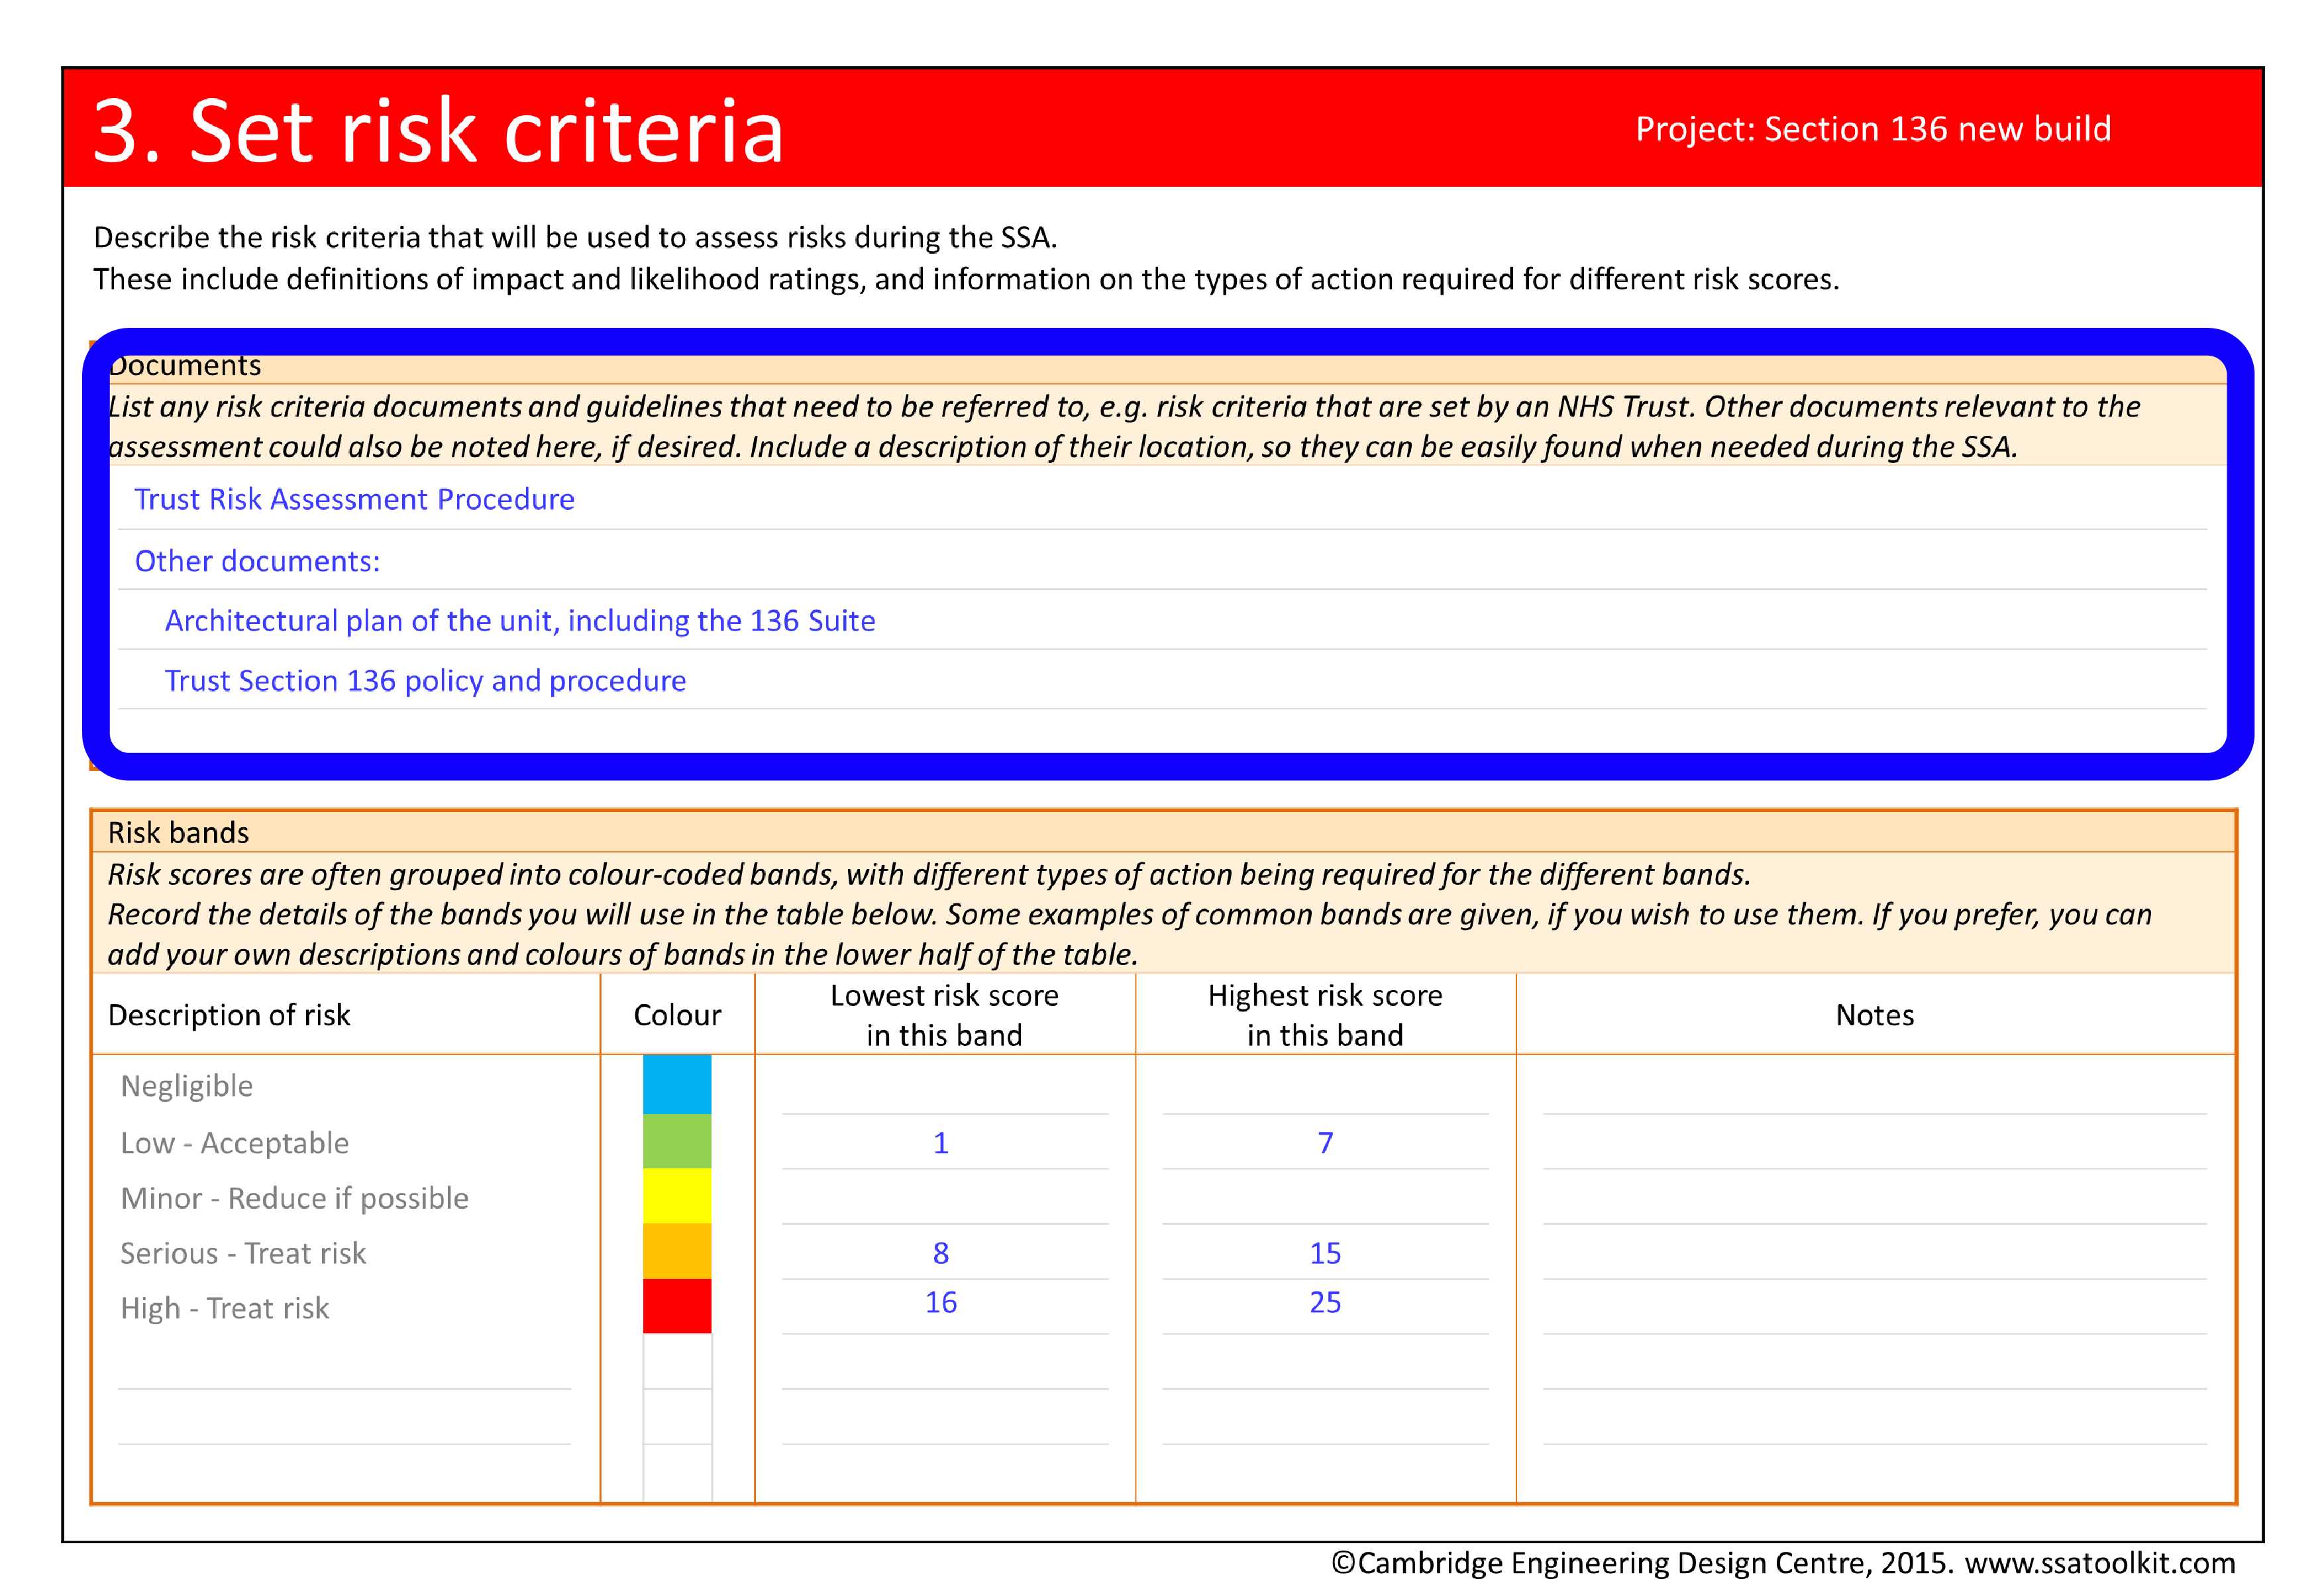 Screenshot of the Set risk criteria page from the Section 136 case study. The section on documents is circled. The documents listed are the Trust Risk Assessment Procedure, the architectural plan of the unit, including the 136 Suite, and the Trust Section 136 policy and procedure. The full form in pdf is available from the Resources page.